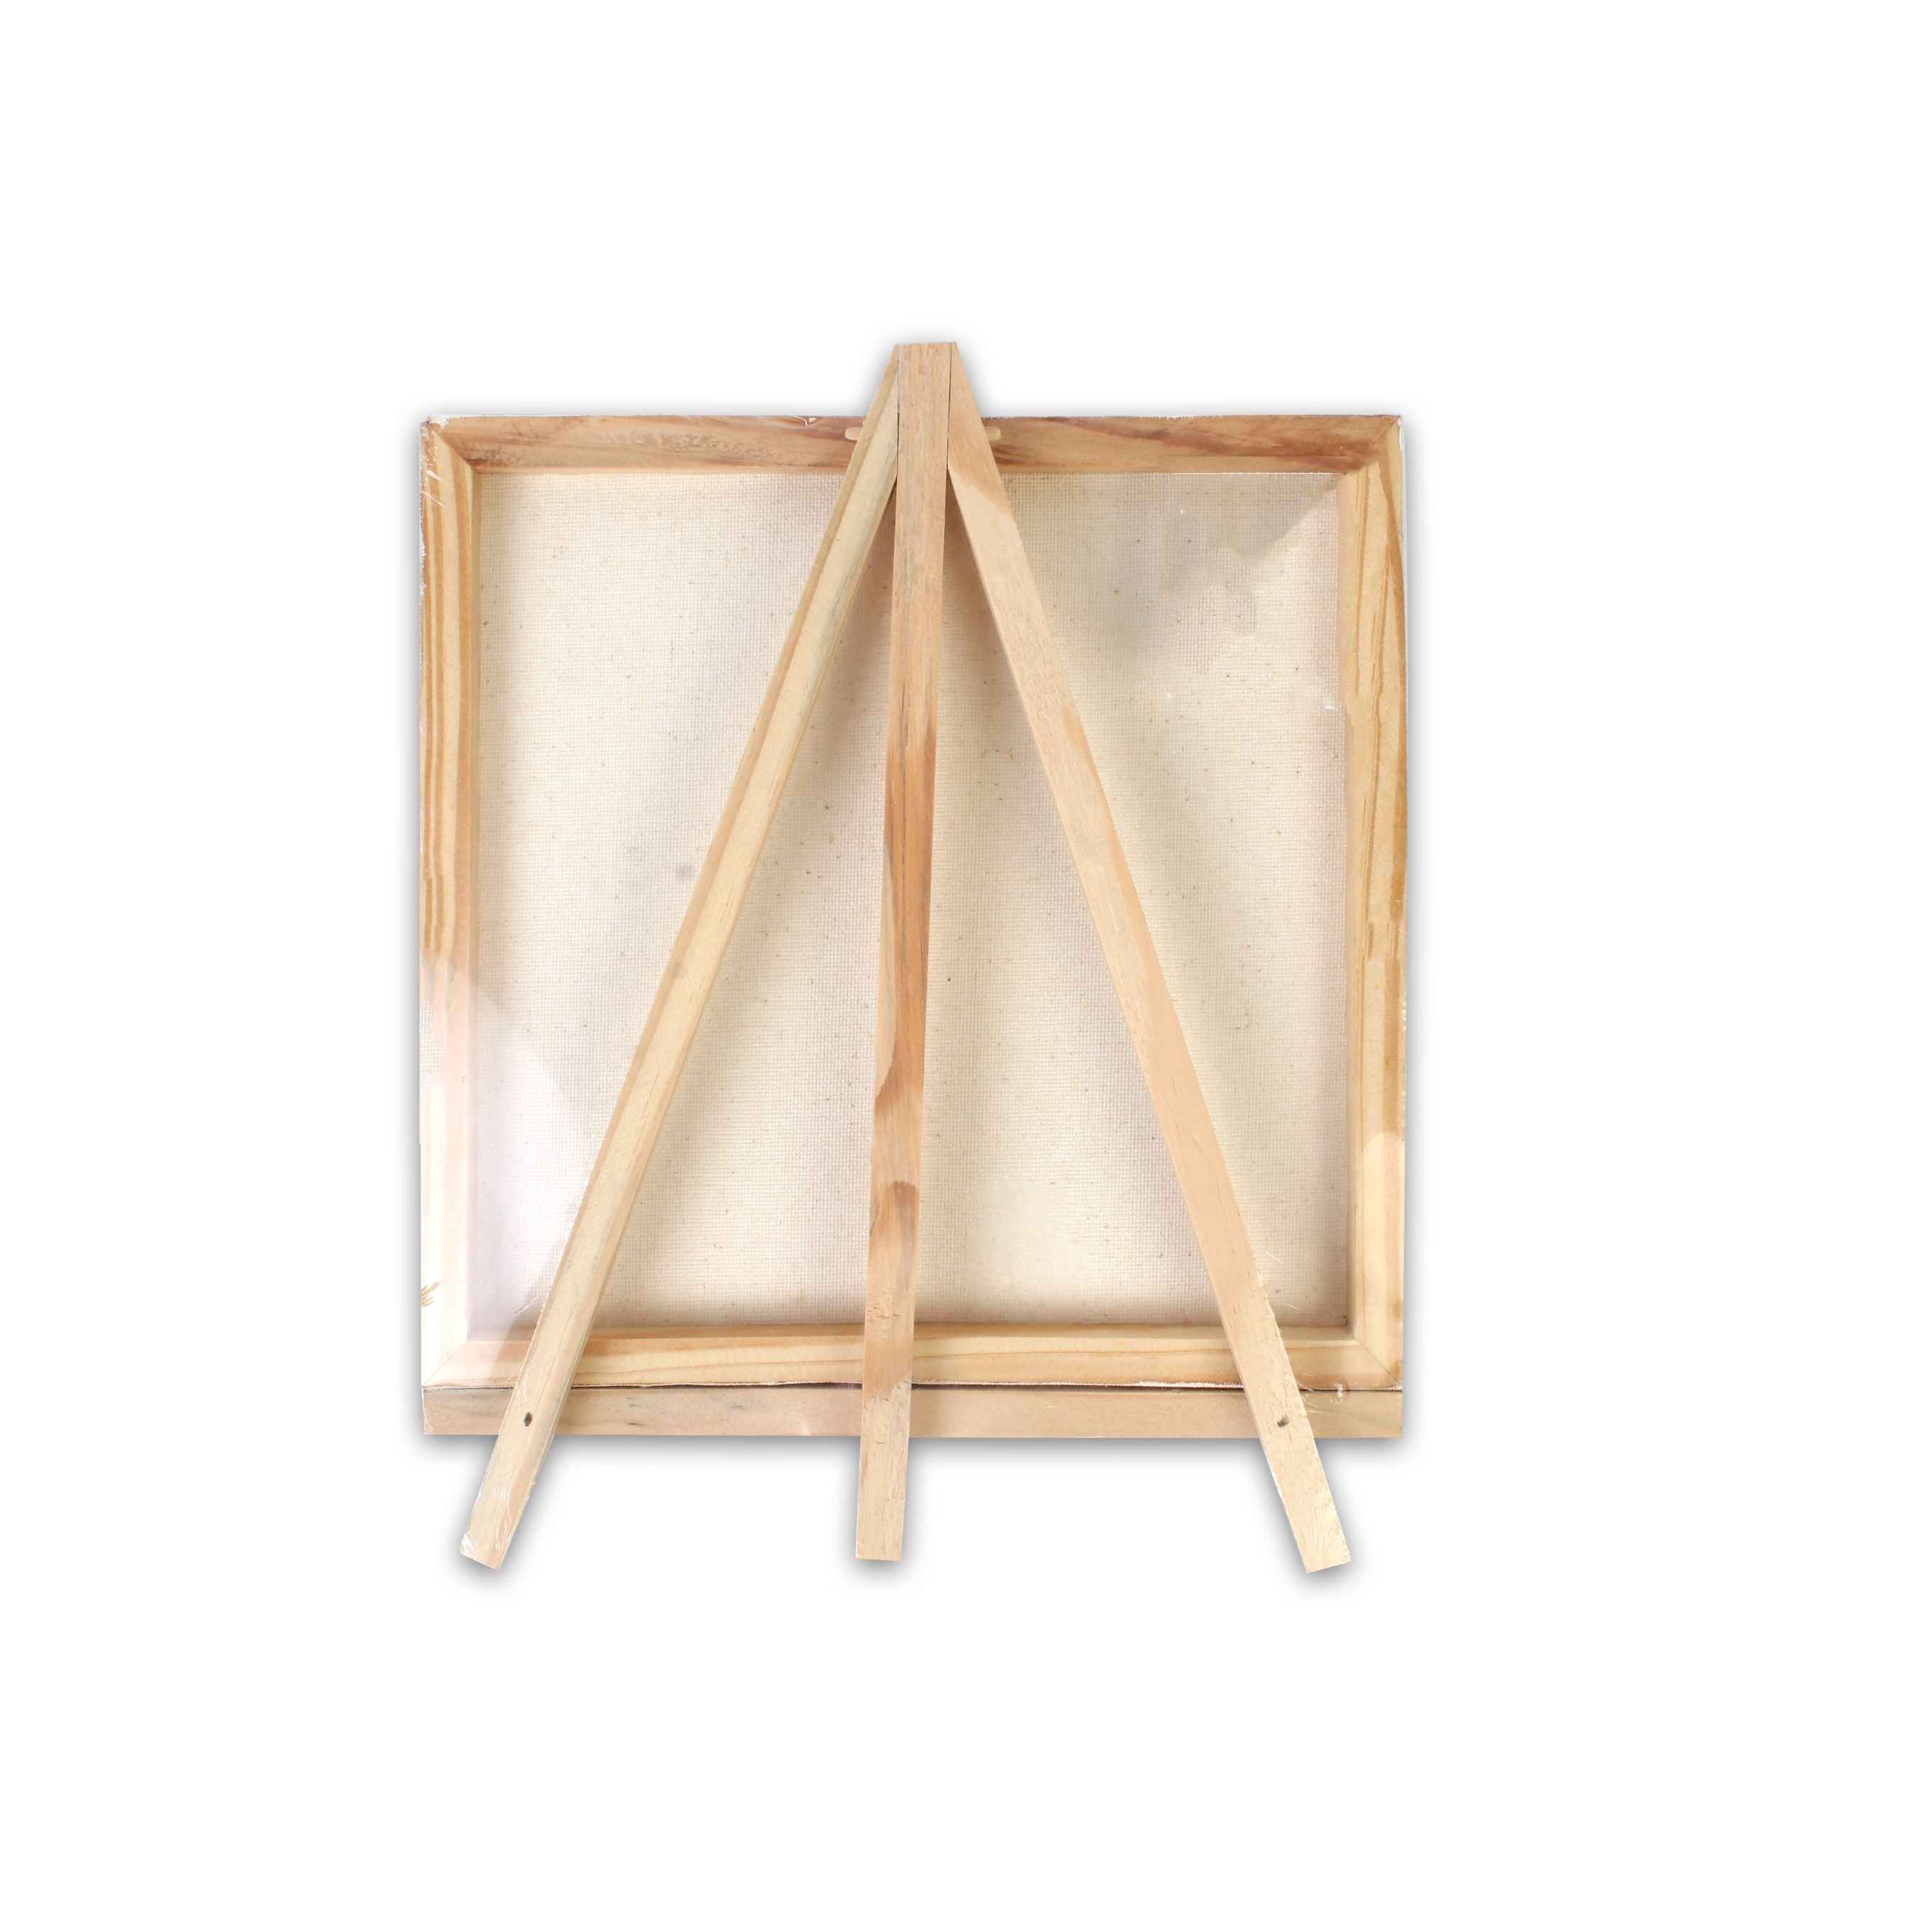 Wooden Mini Easel With Canvas Easel Size 24Cm Canvas Size 20 X 20Cm 1Pc